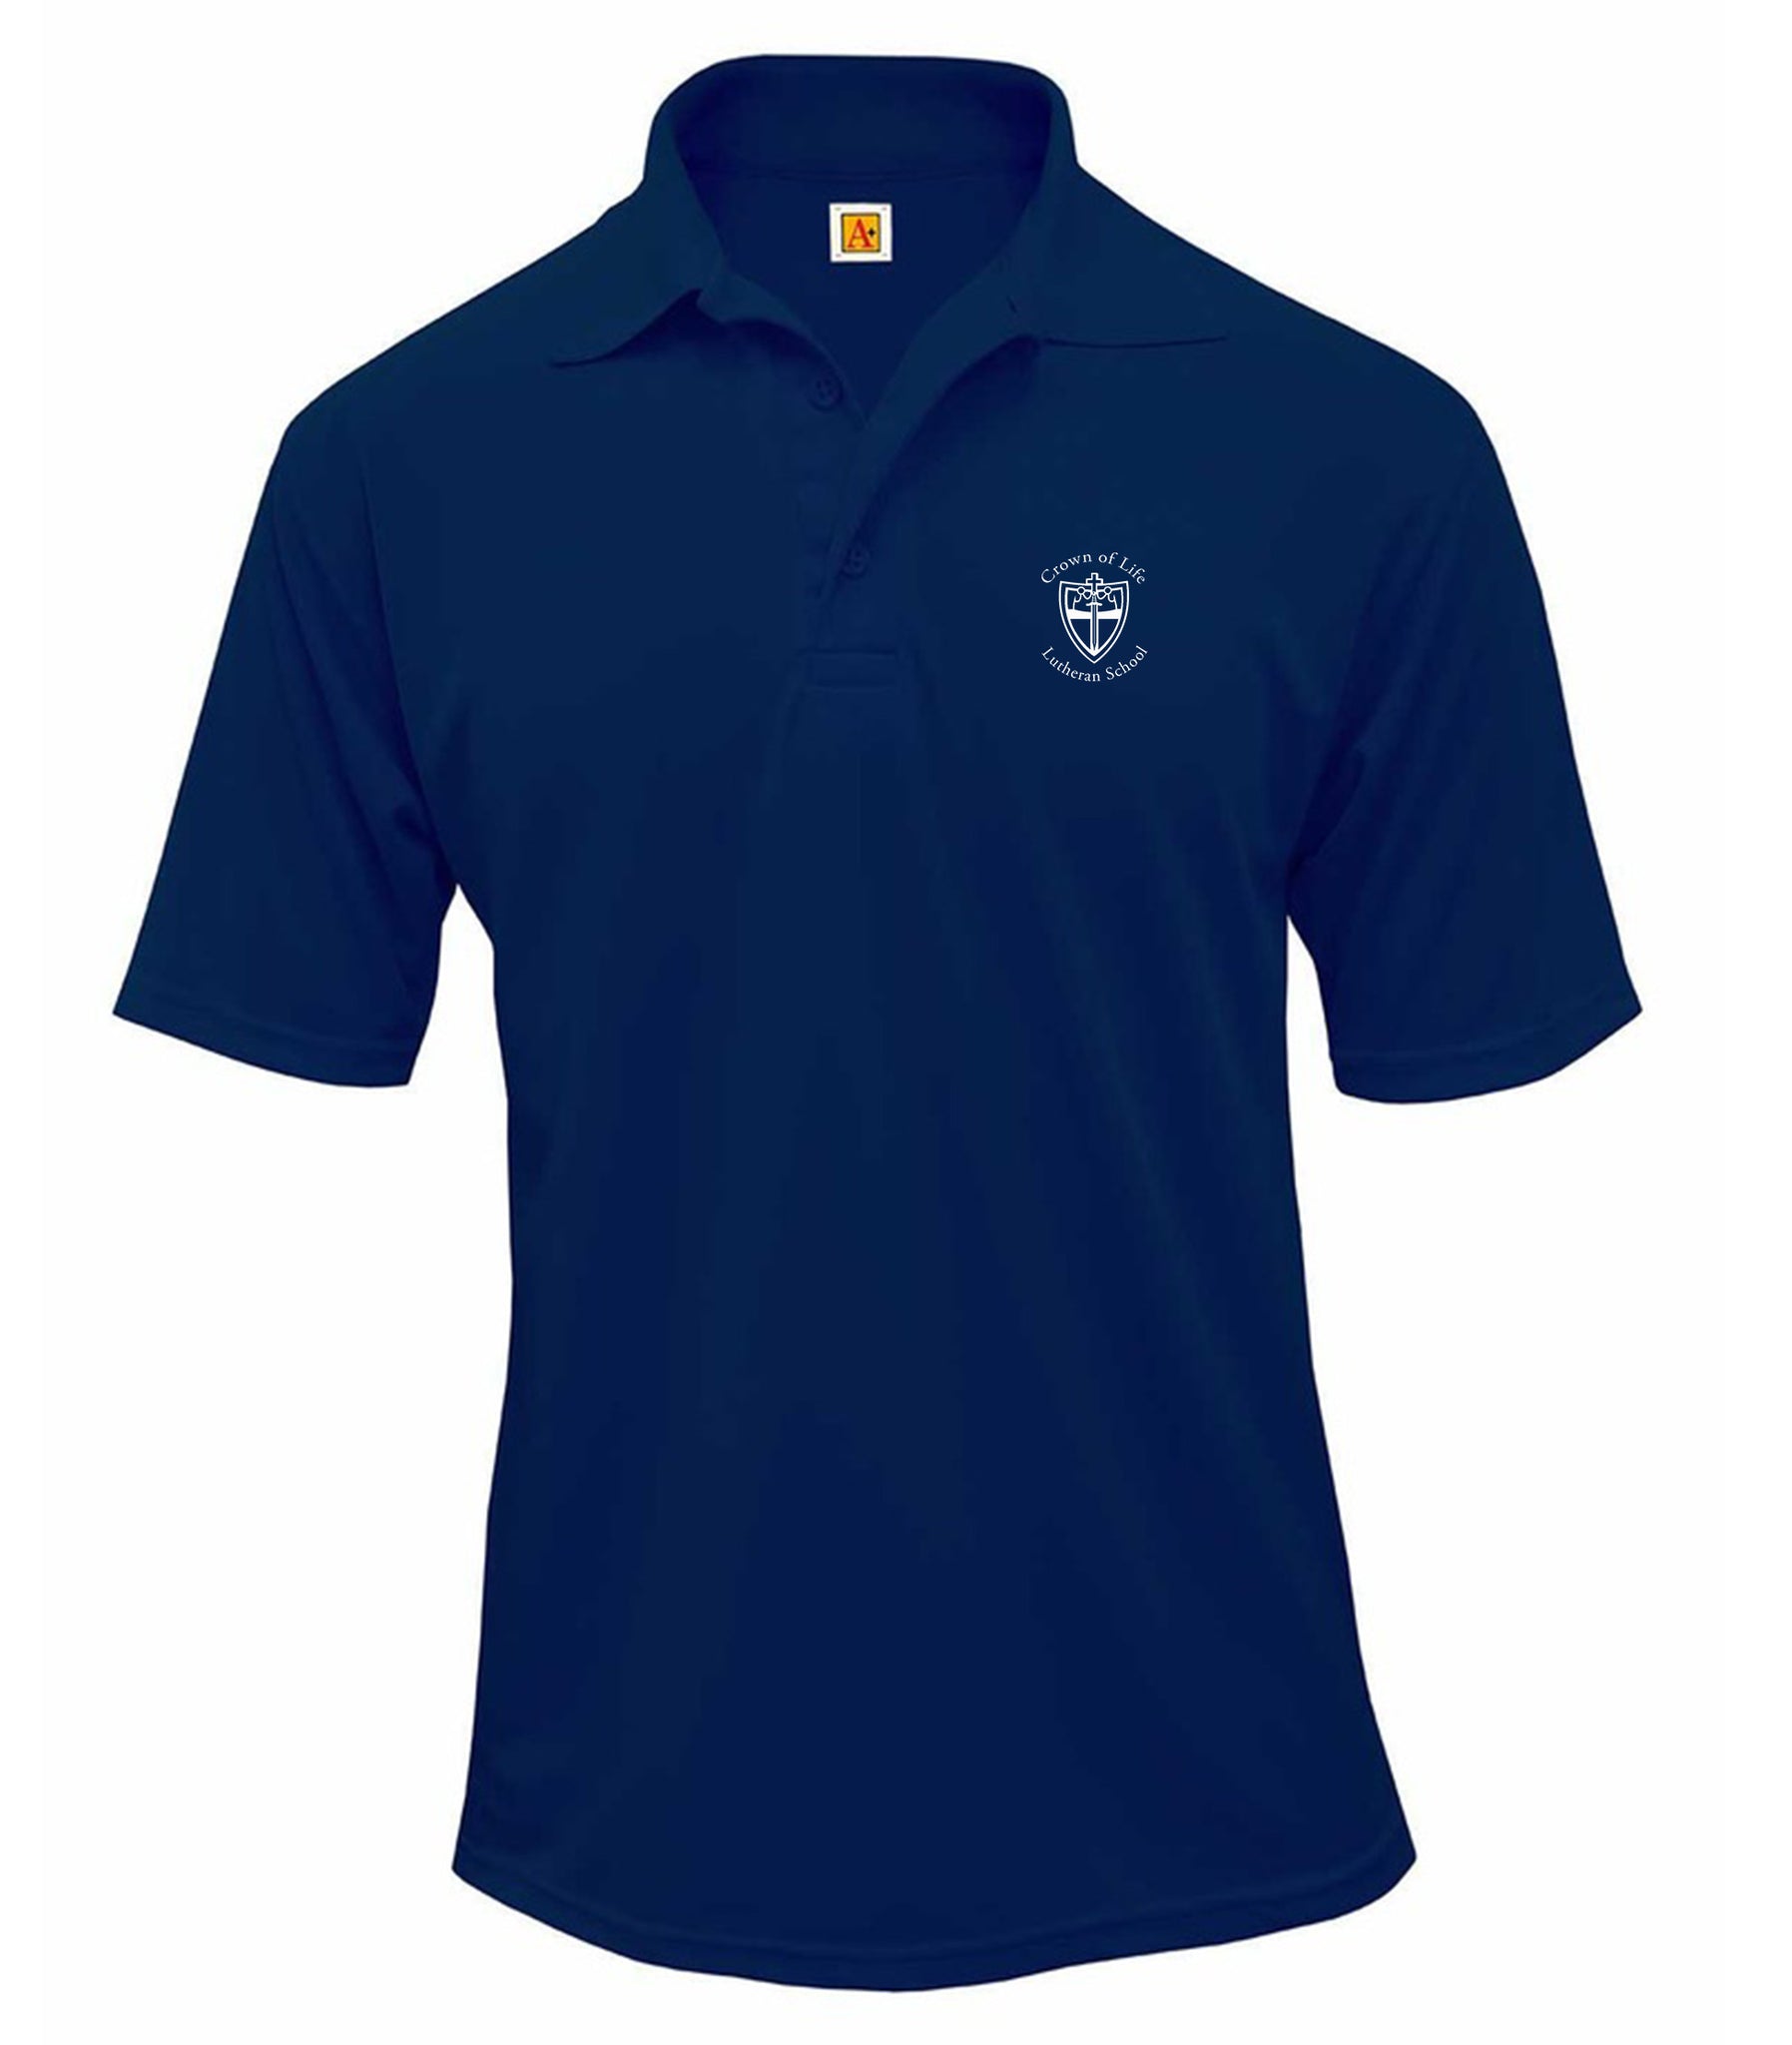 8953-COL Youth Dri-fit Polo-50% OFF